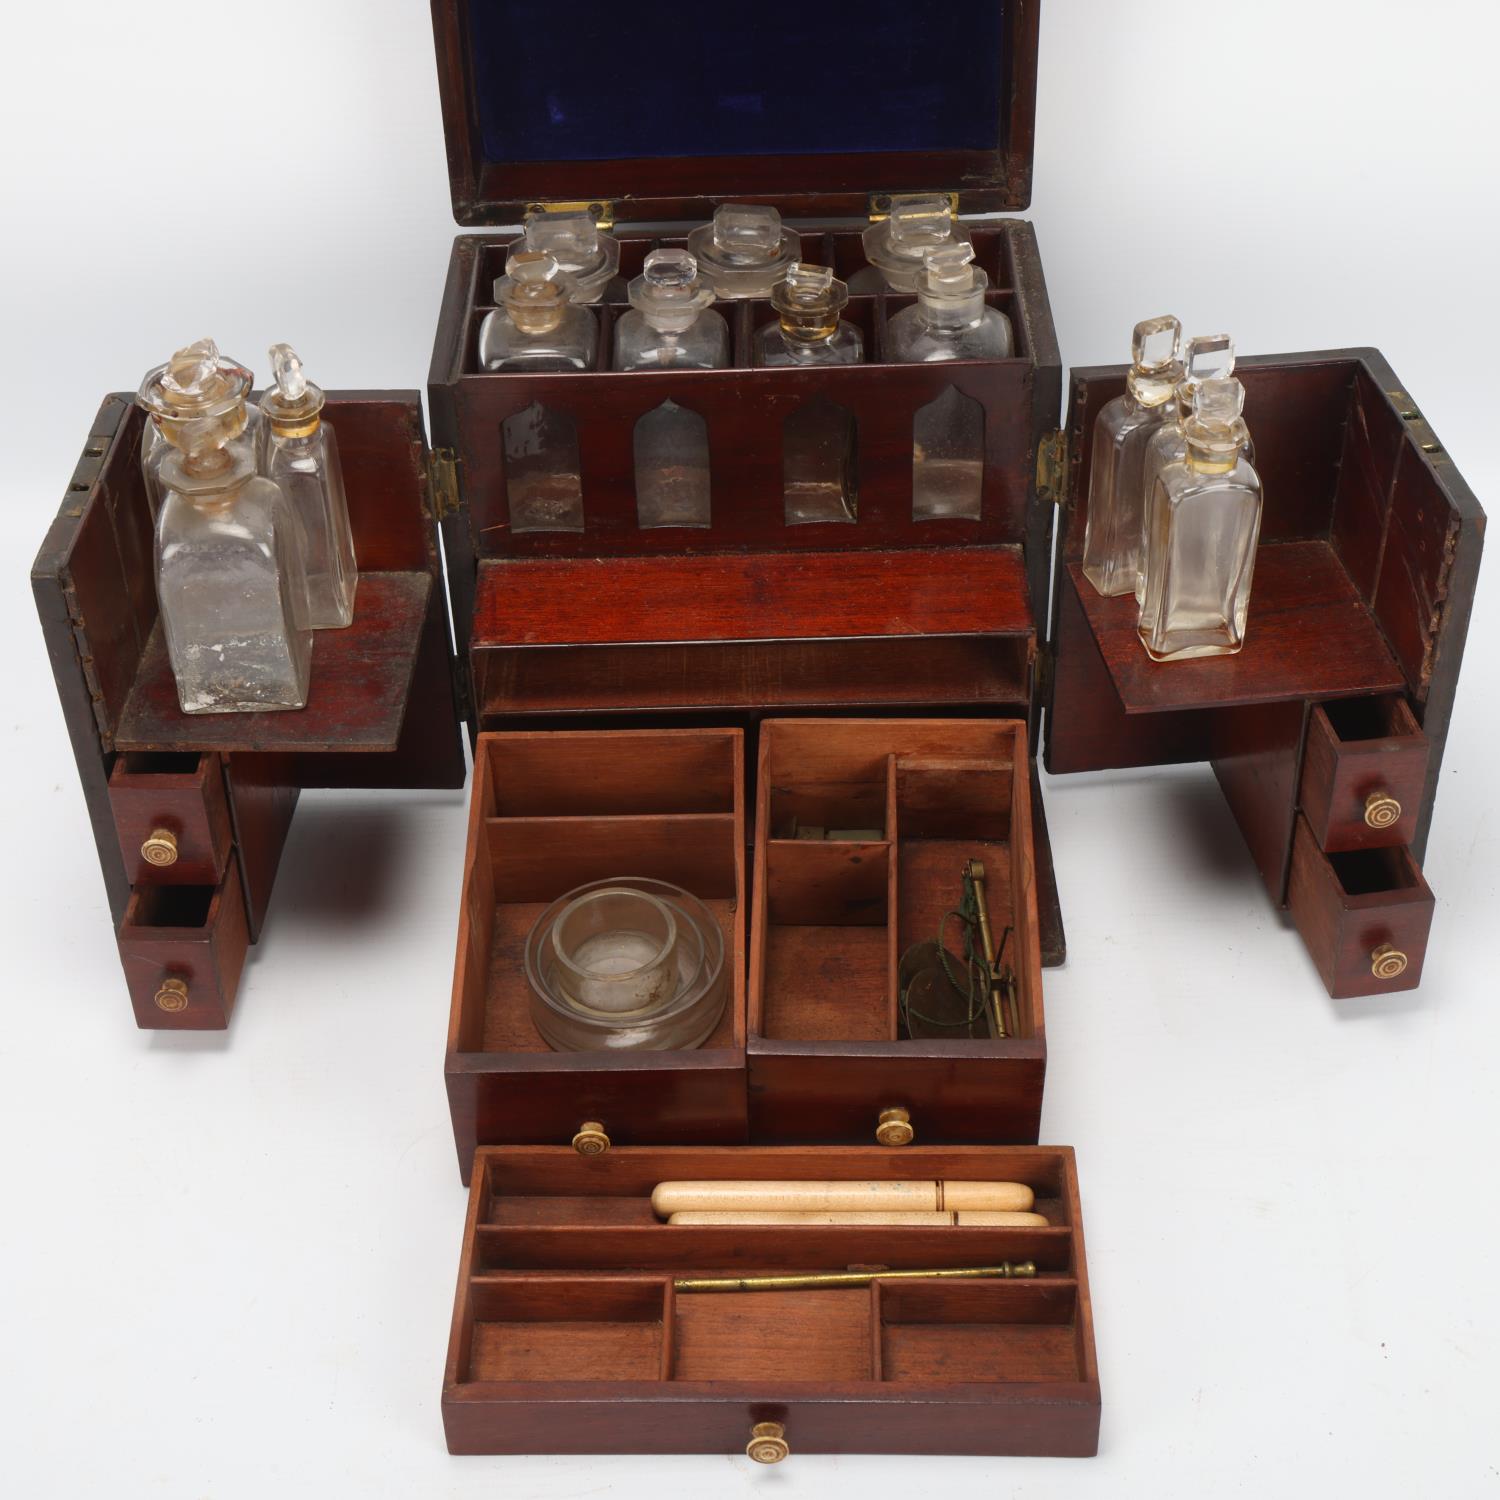 A 19th century brass-bound mahogany travelling apothecary cabinet, with hinged lid and doors opening - Image 2 of 3